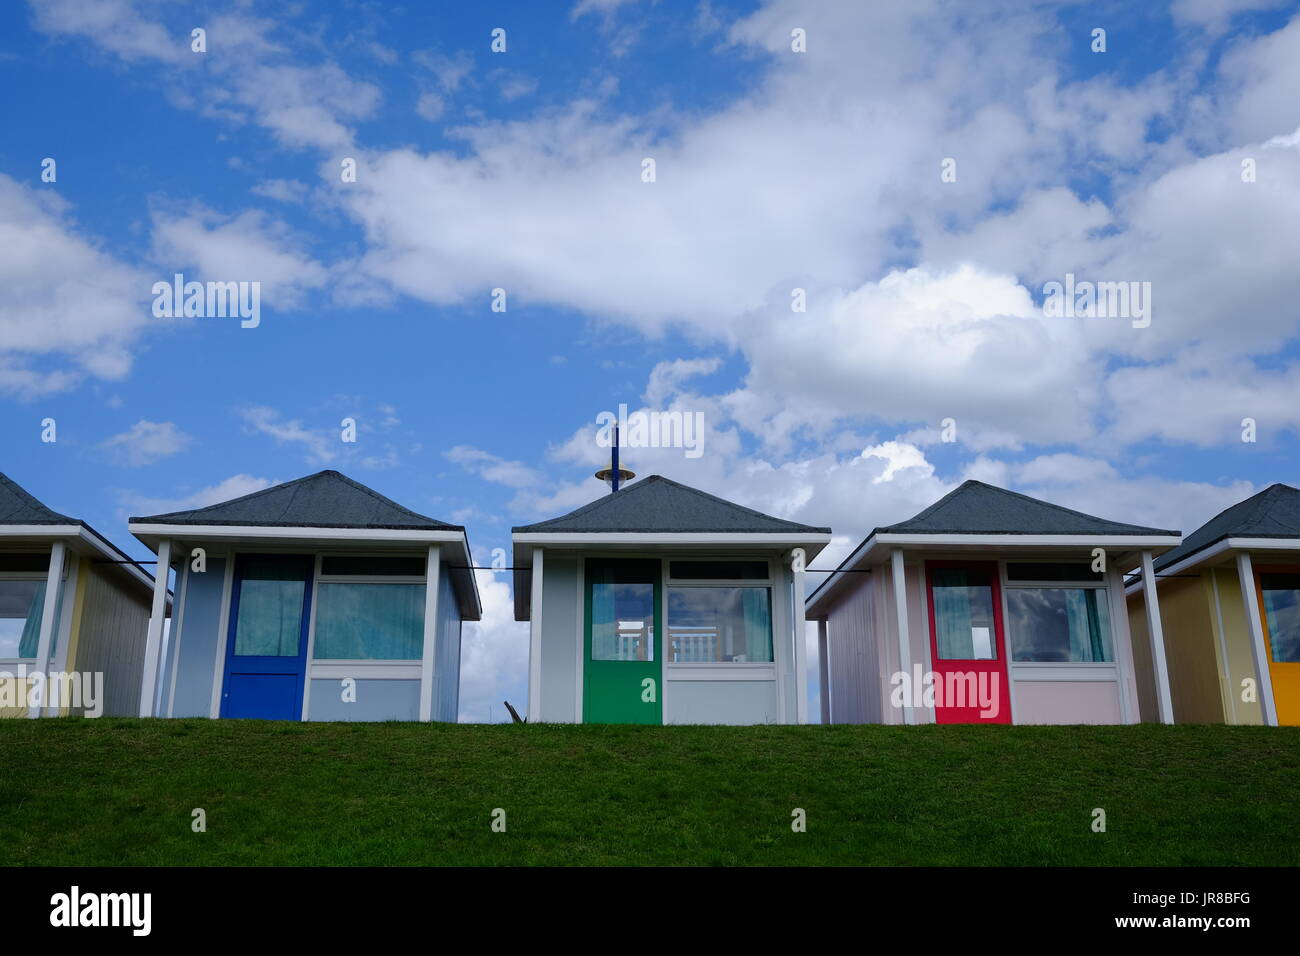 The beautiful beach huts of the seaside resort of Mablethorpe in Lincolnshire Stock Photo